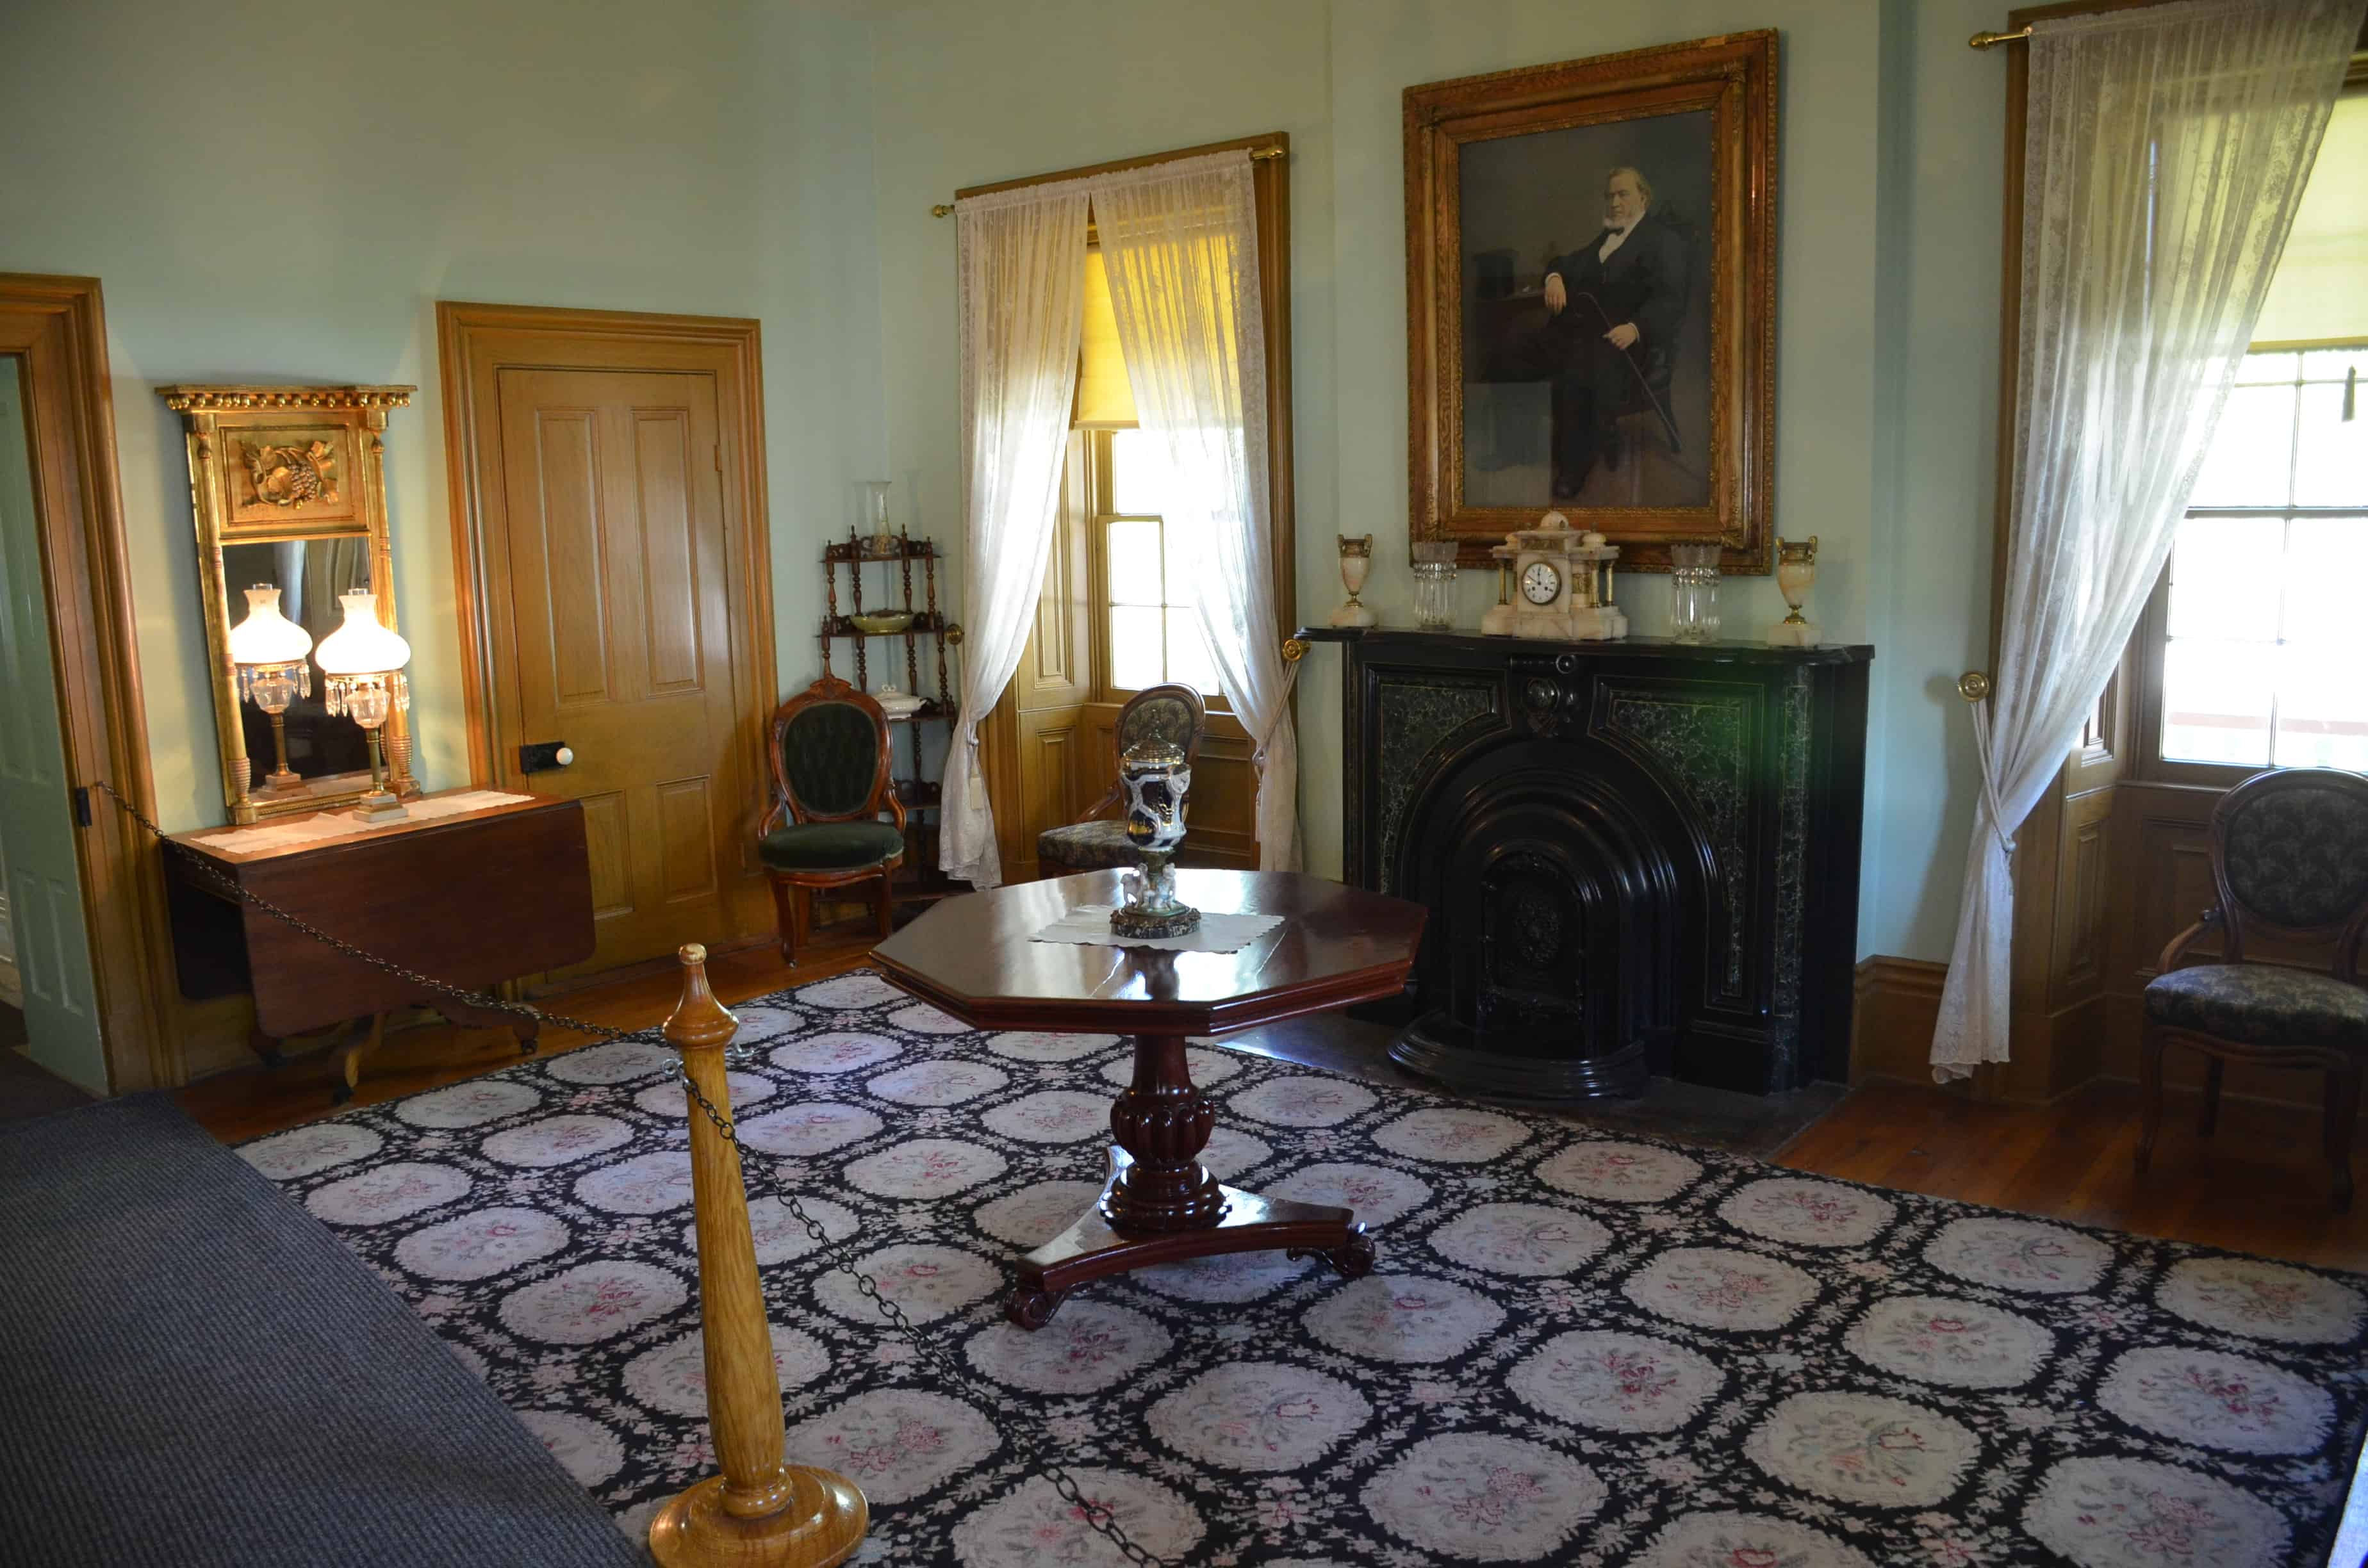 Parlor at the Brigham Young Winter Home in St. George, Utah